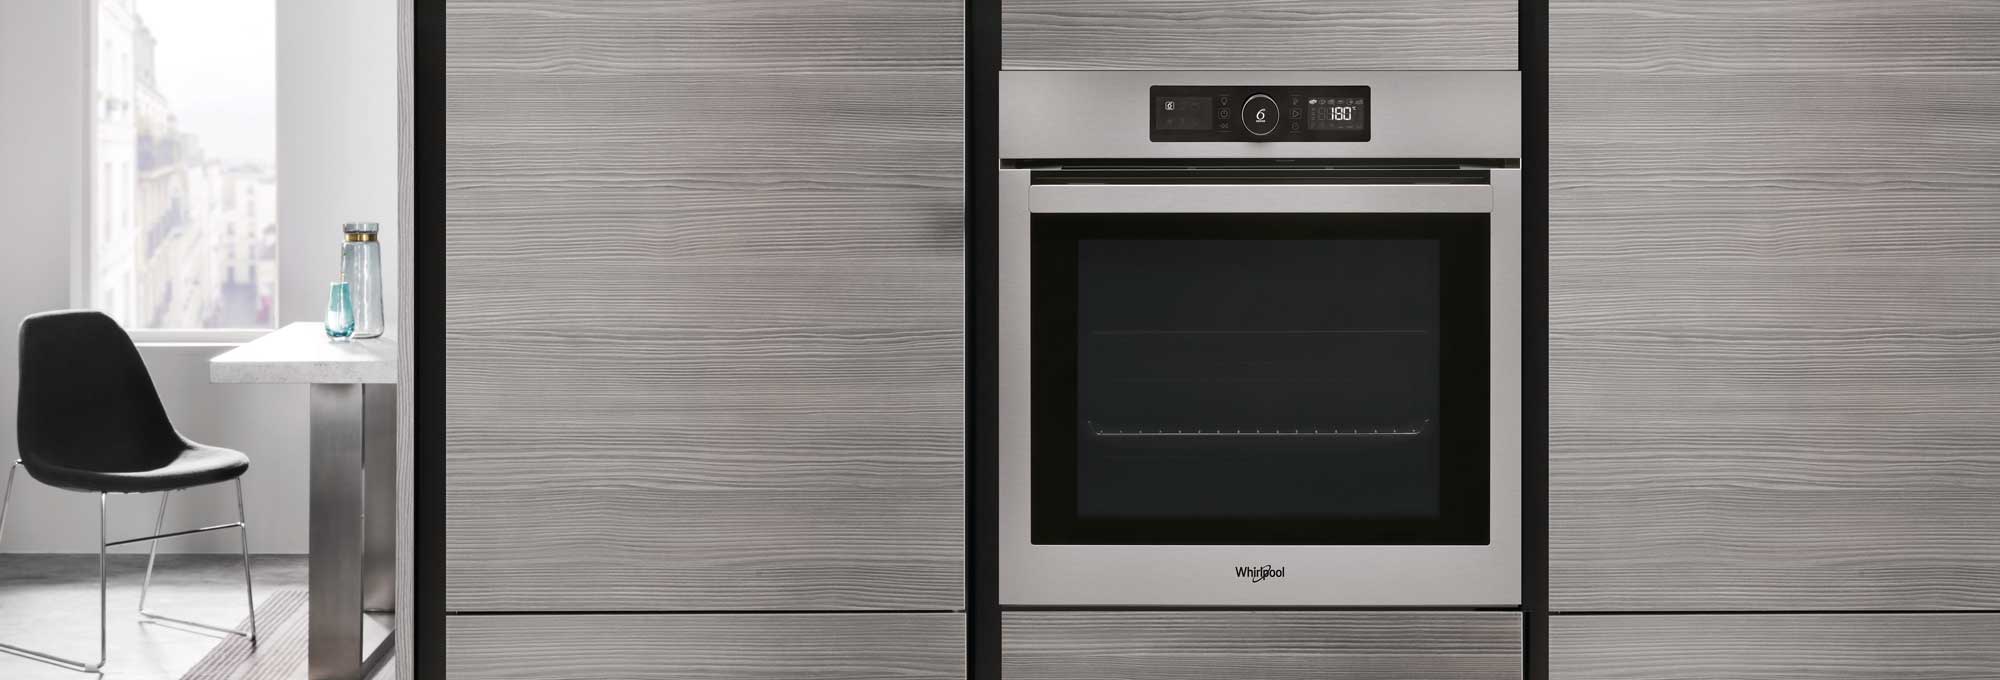 Whirlpool Absolute AKZ96230IX Built In Electric Single Oven - Stainless Steel - AKZ96230IX_SS - 2